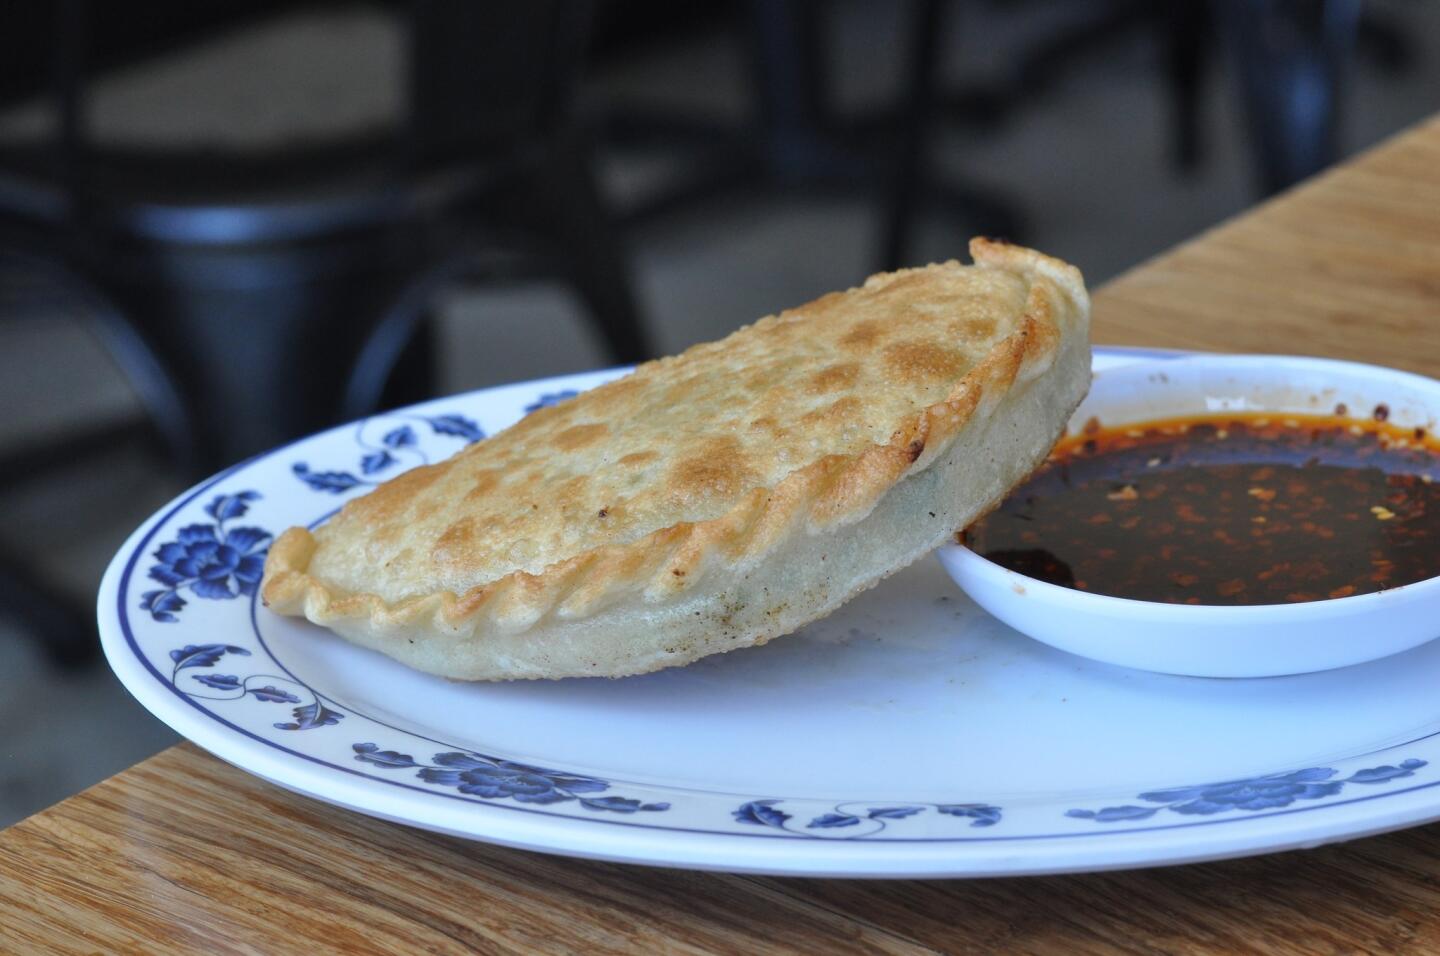 A meat pie at House of Bao, with the small bowl that came filled with spicy peanuts and is now filled with chiles and black vinegar.